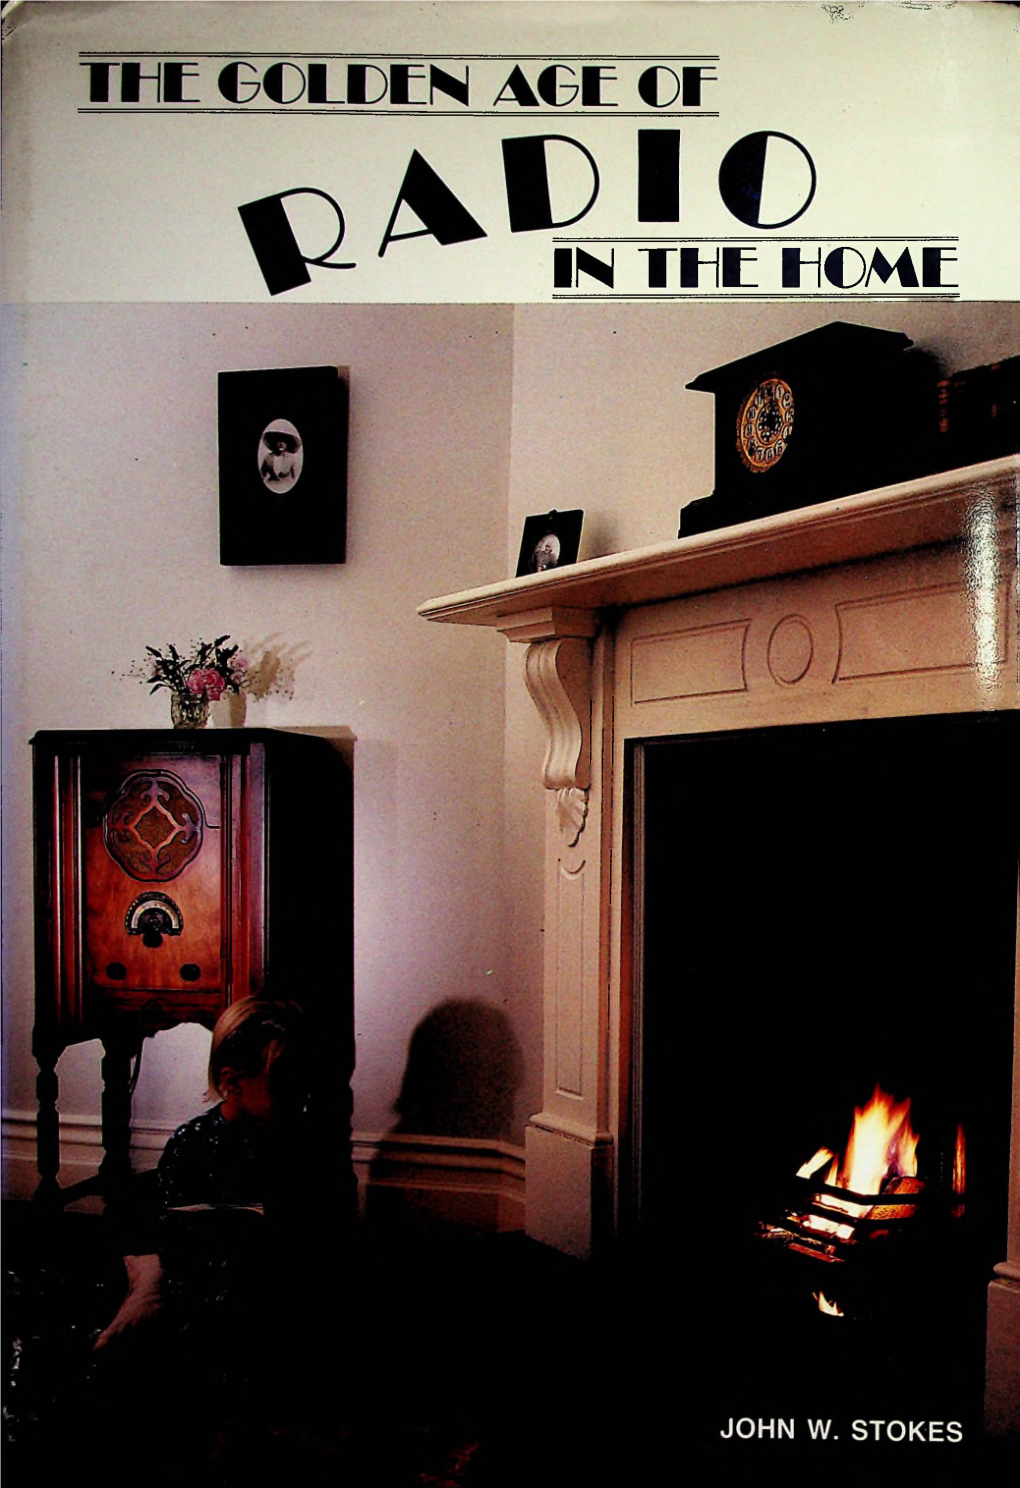 In the Home the Golden Age of Radio in the Home